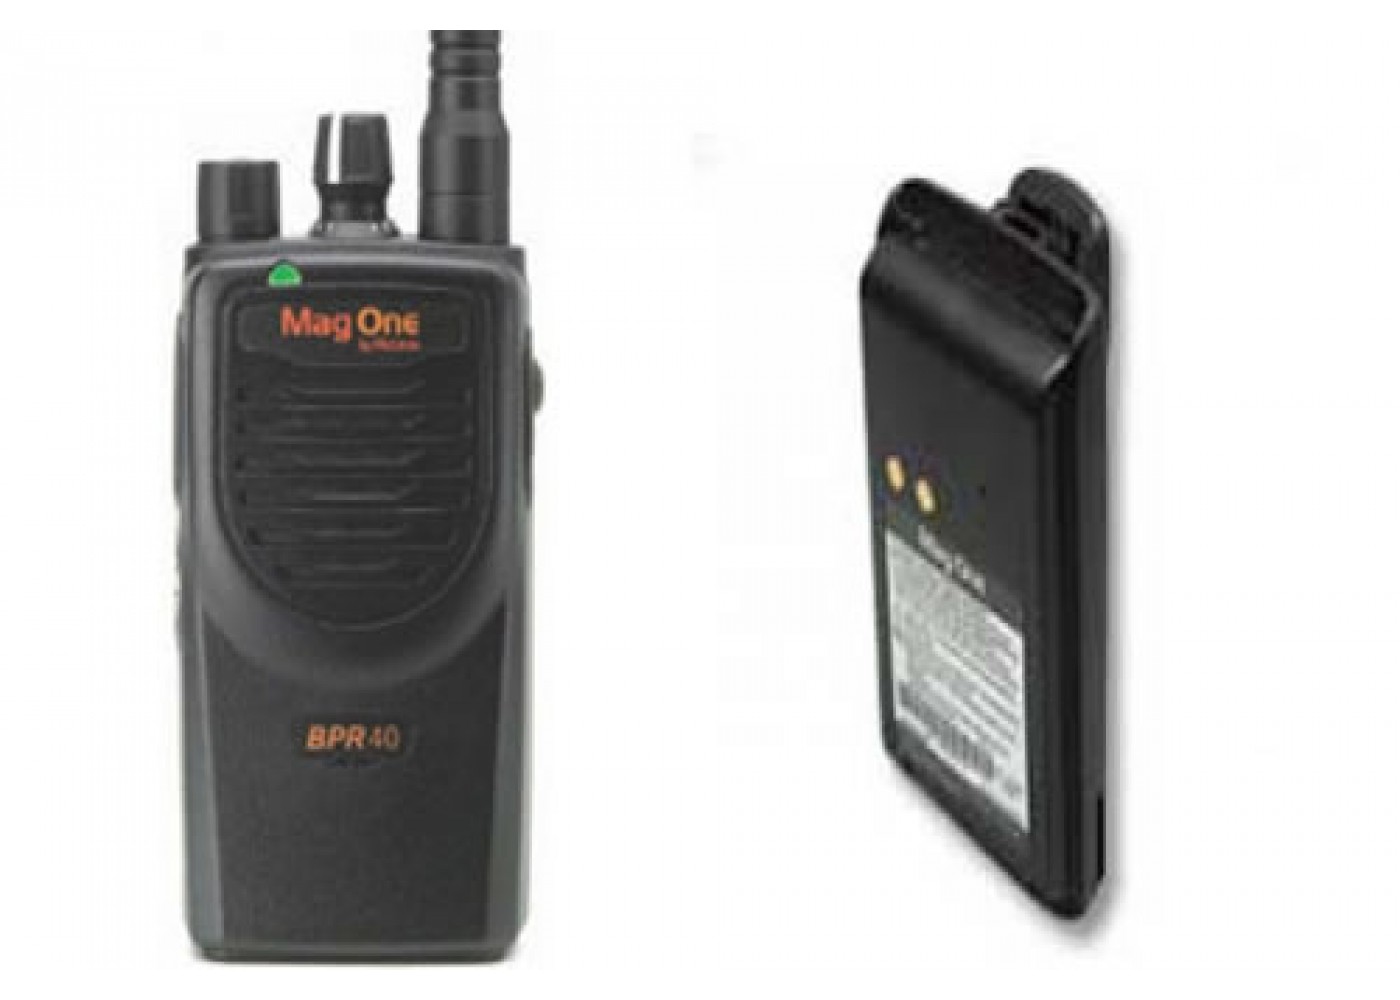 BPR40 UHF channel two-way radio with spare battery